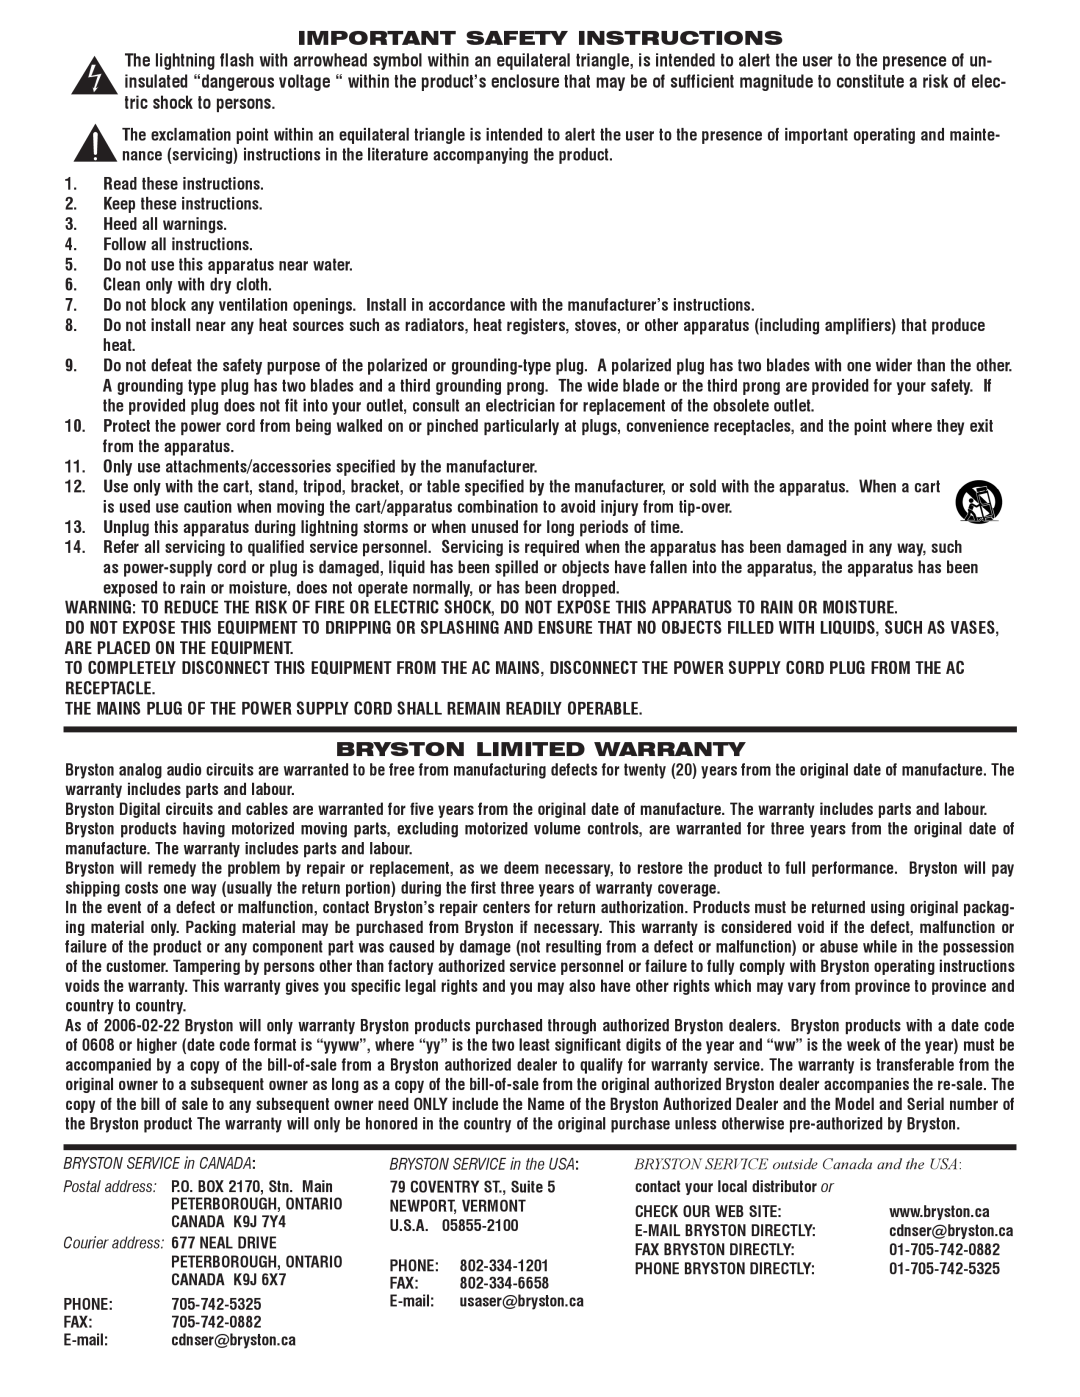 Bryston BCD-1 owner manual Important Safety Instructions, Bryston Limited Warranty 